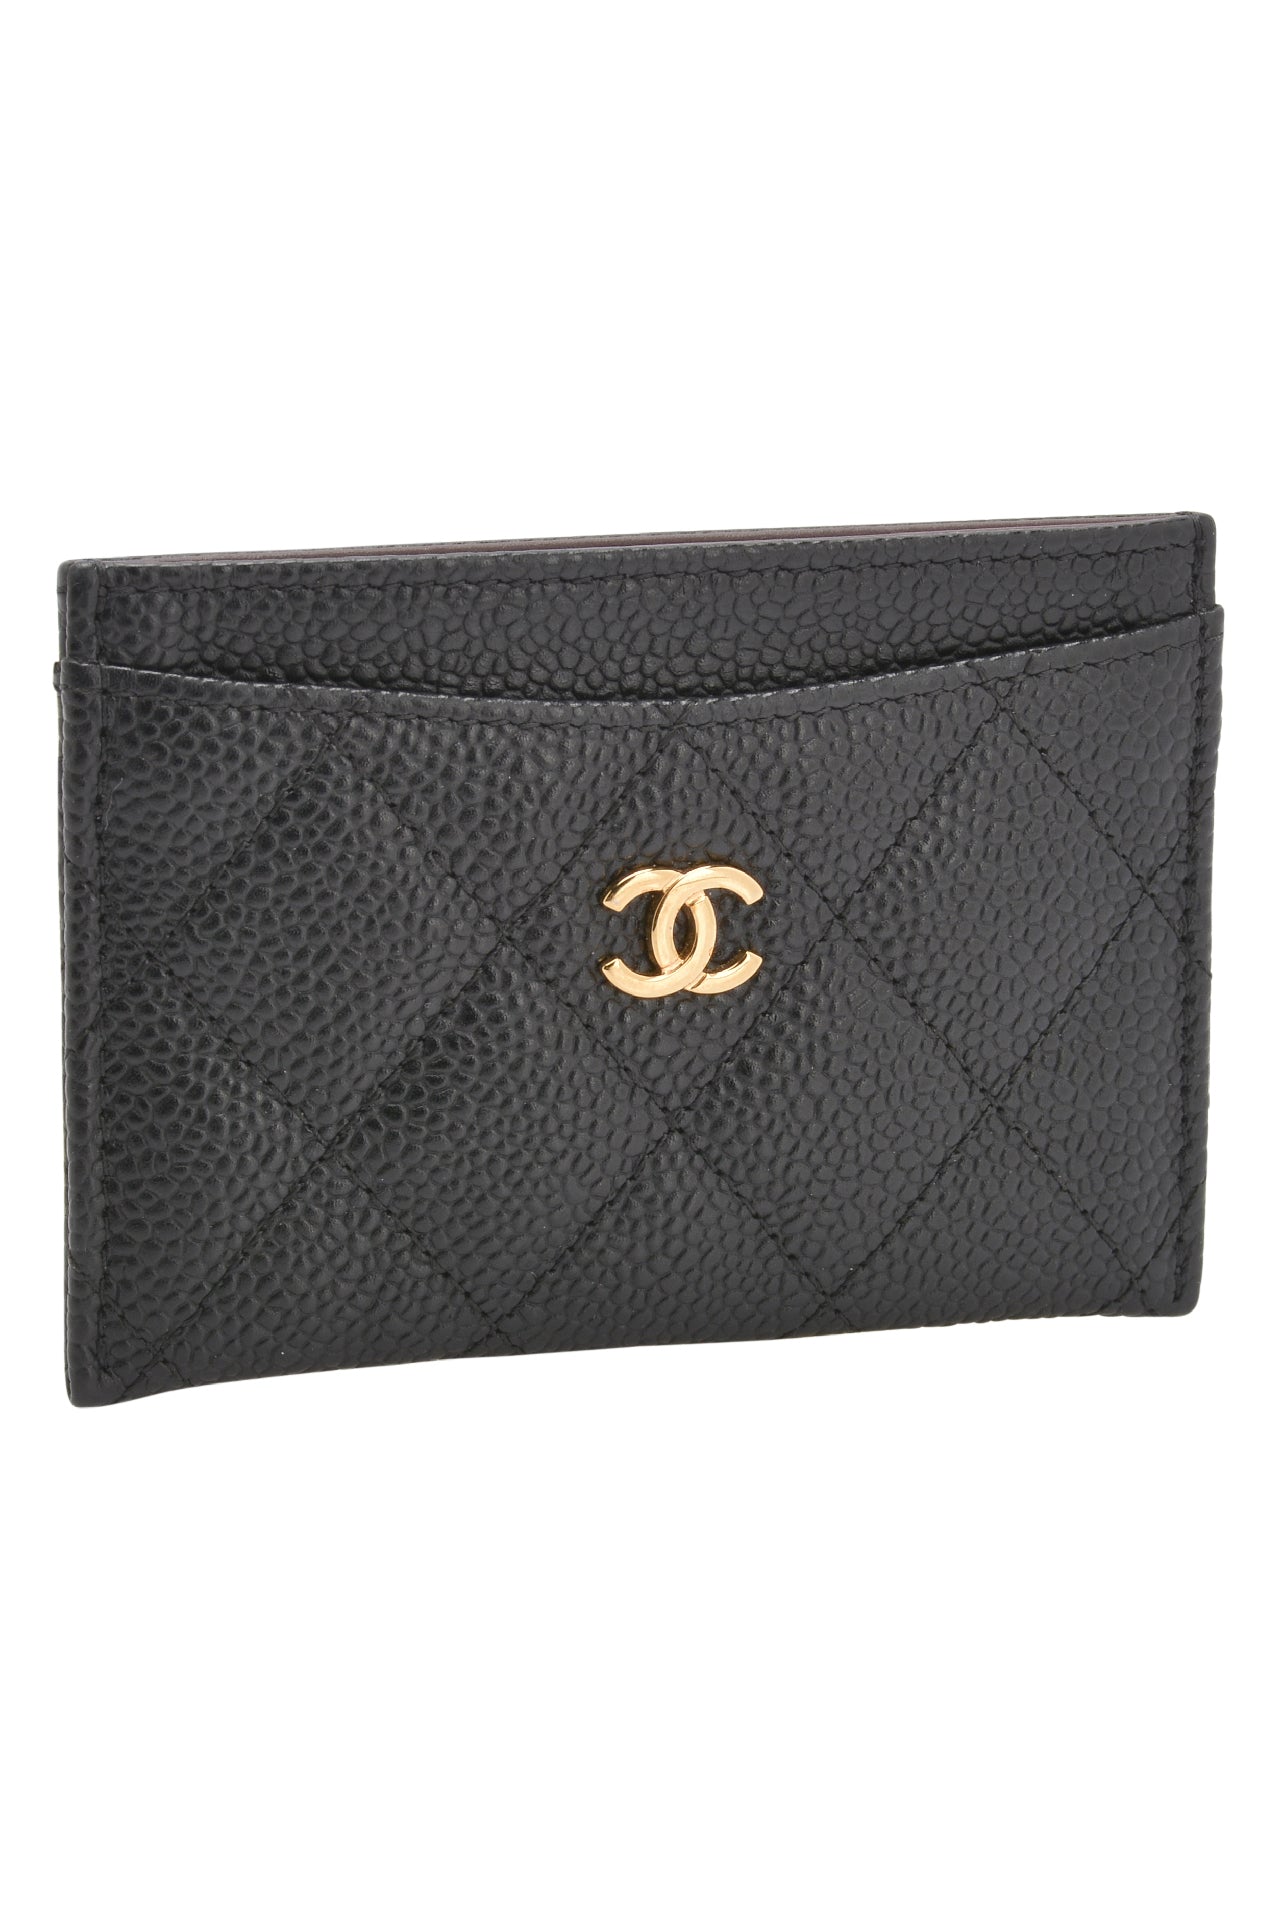 Chanel Black Quilted Caviar Leather Classic Card Holder